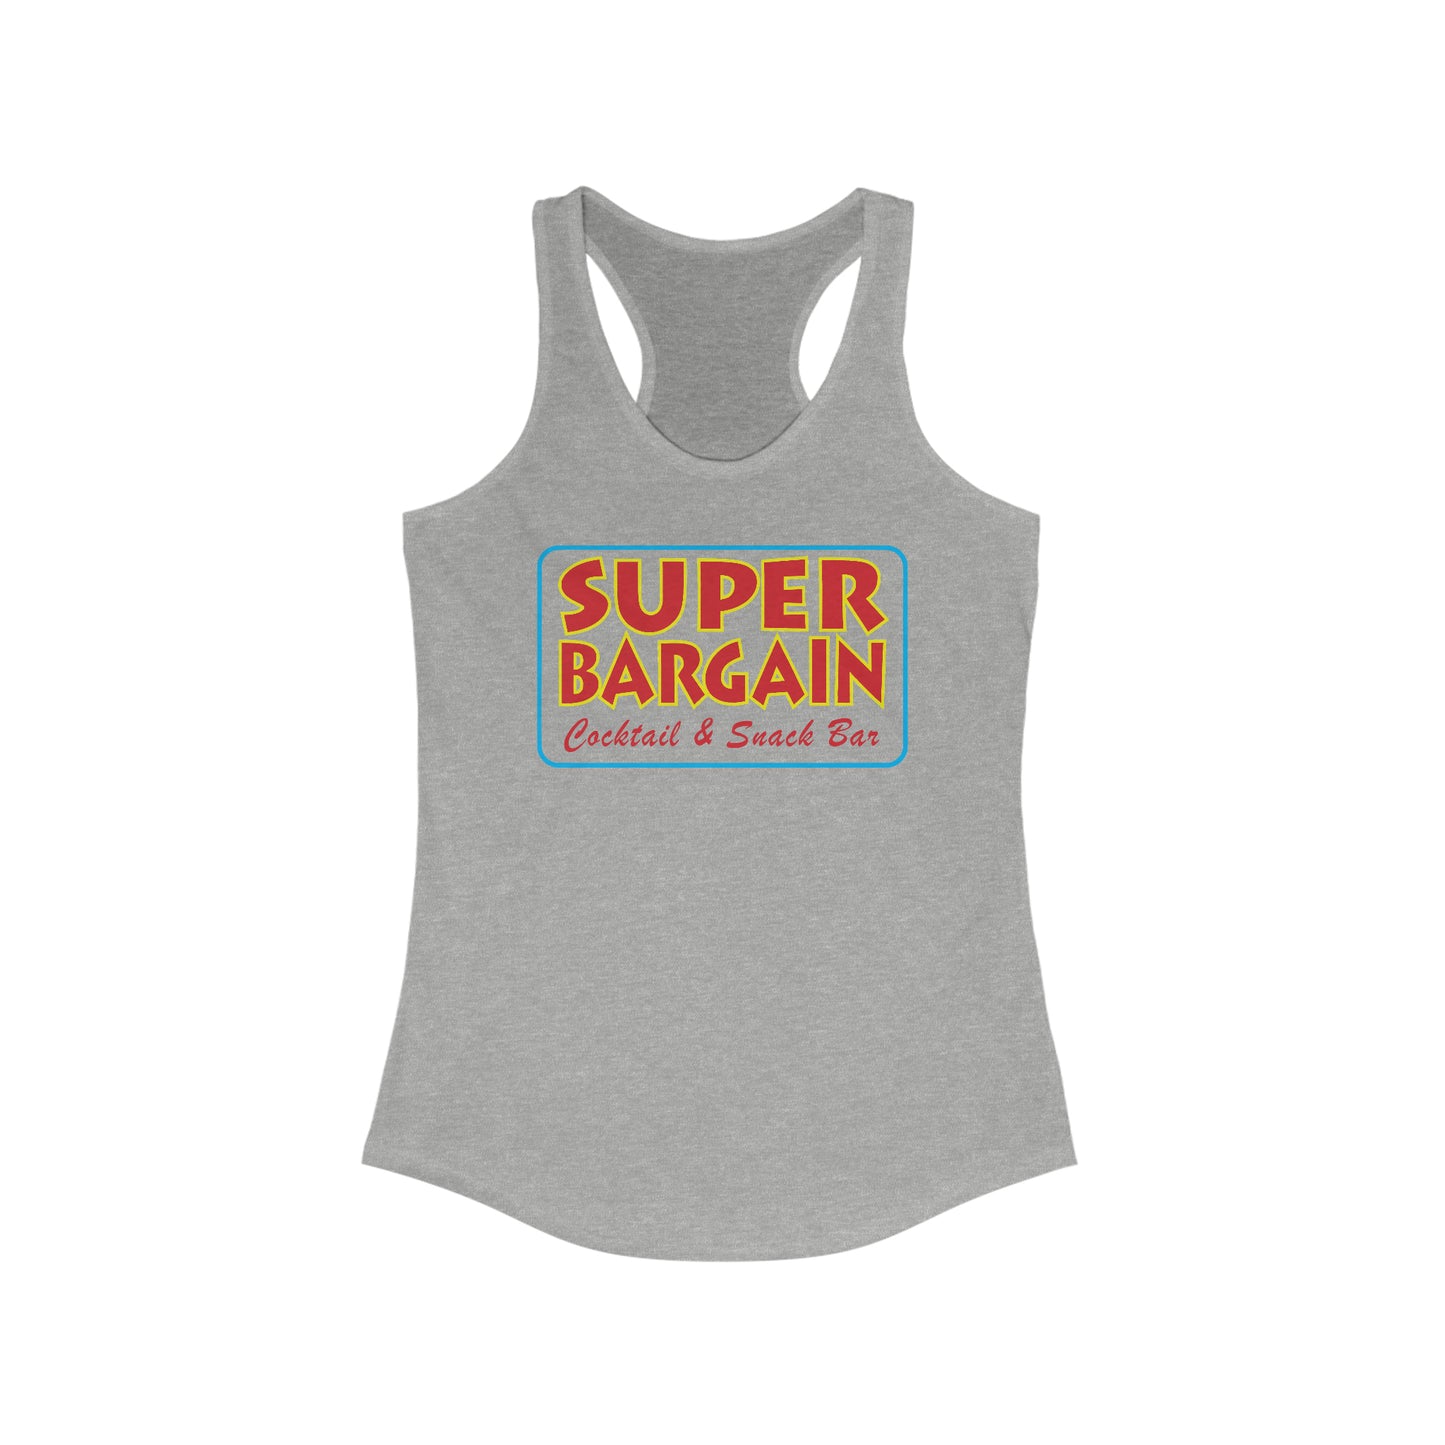 Gray Women's Logo Racerback Tank by Printify featuring a colorful logo with text "SUPER BARGAIN Cabbagetown Cocktail & Snack Bar" in retro style on the chest area.